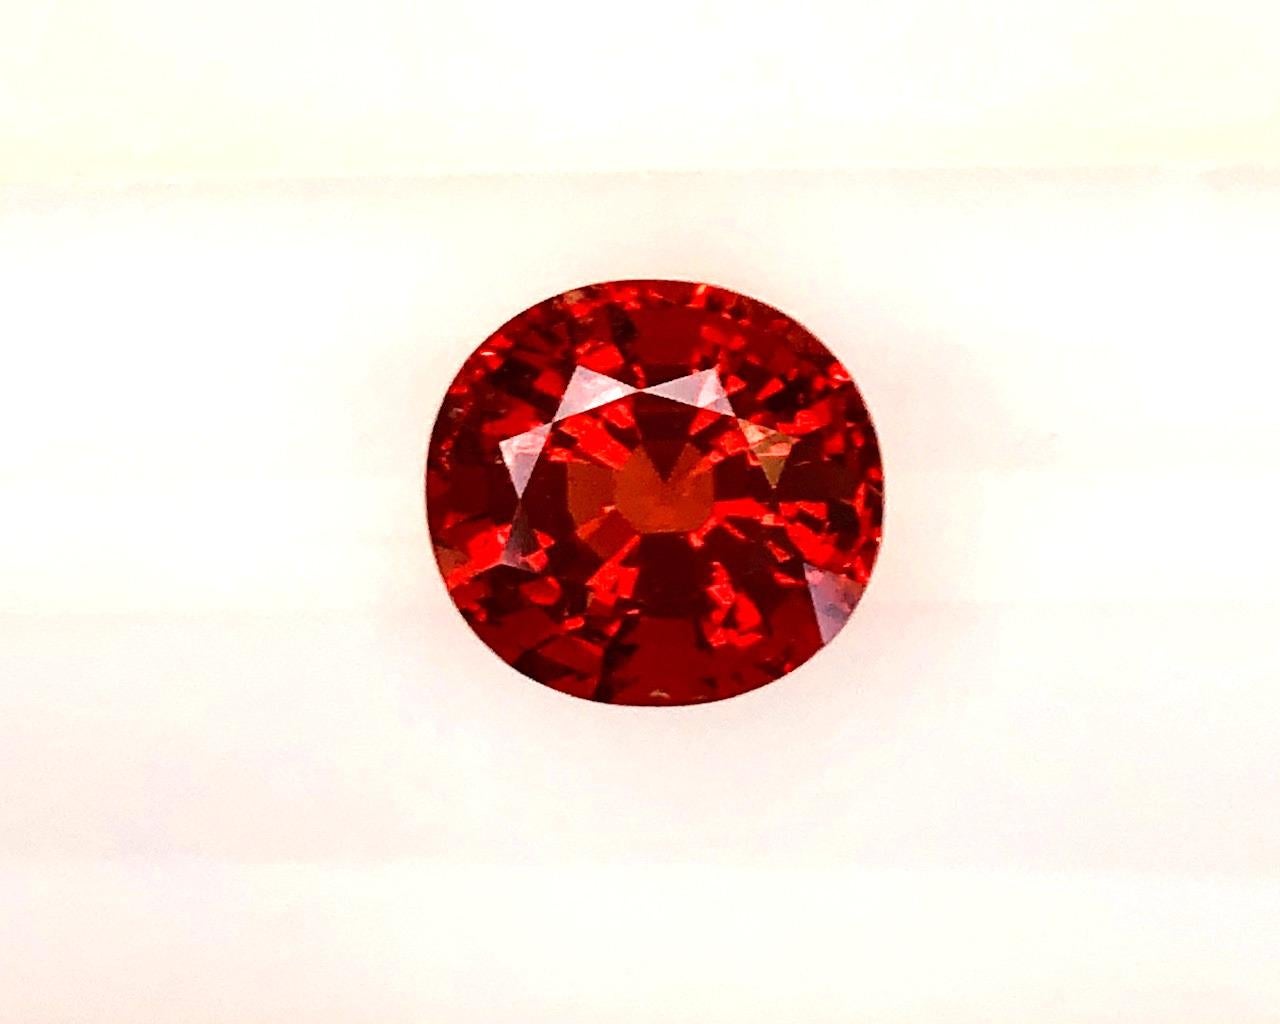 This is a rare opportunity to acquire the collections of a true connoisseur of fine gemstones. 
These curated collections are the culmination of decades spent experiencing the marketplace and evaluating countless gems. They represent the variety of